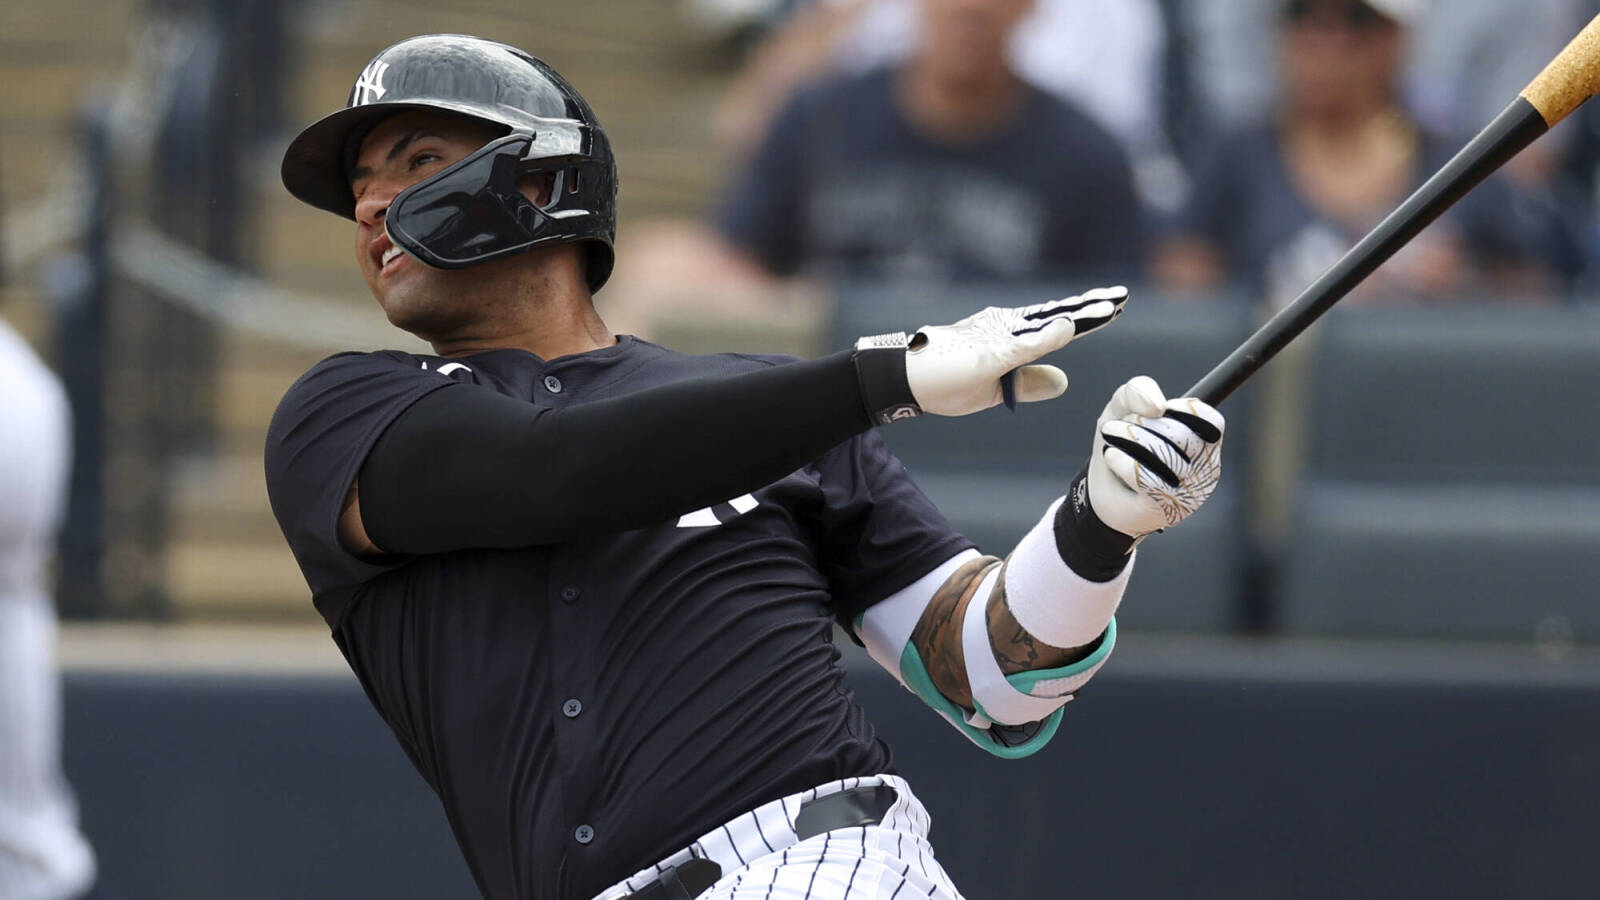 Watch: Yankees infielder continues batting practice during earthquake